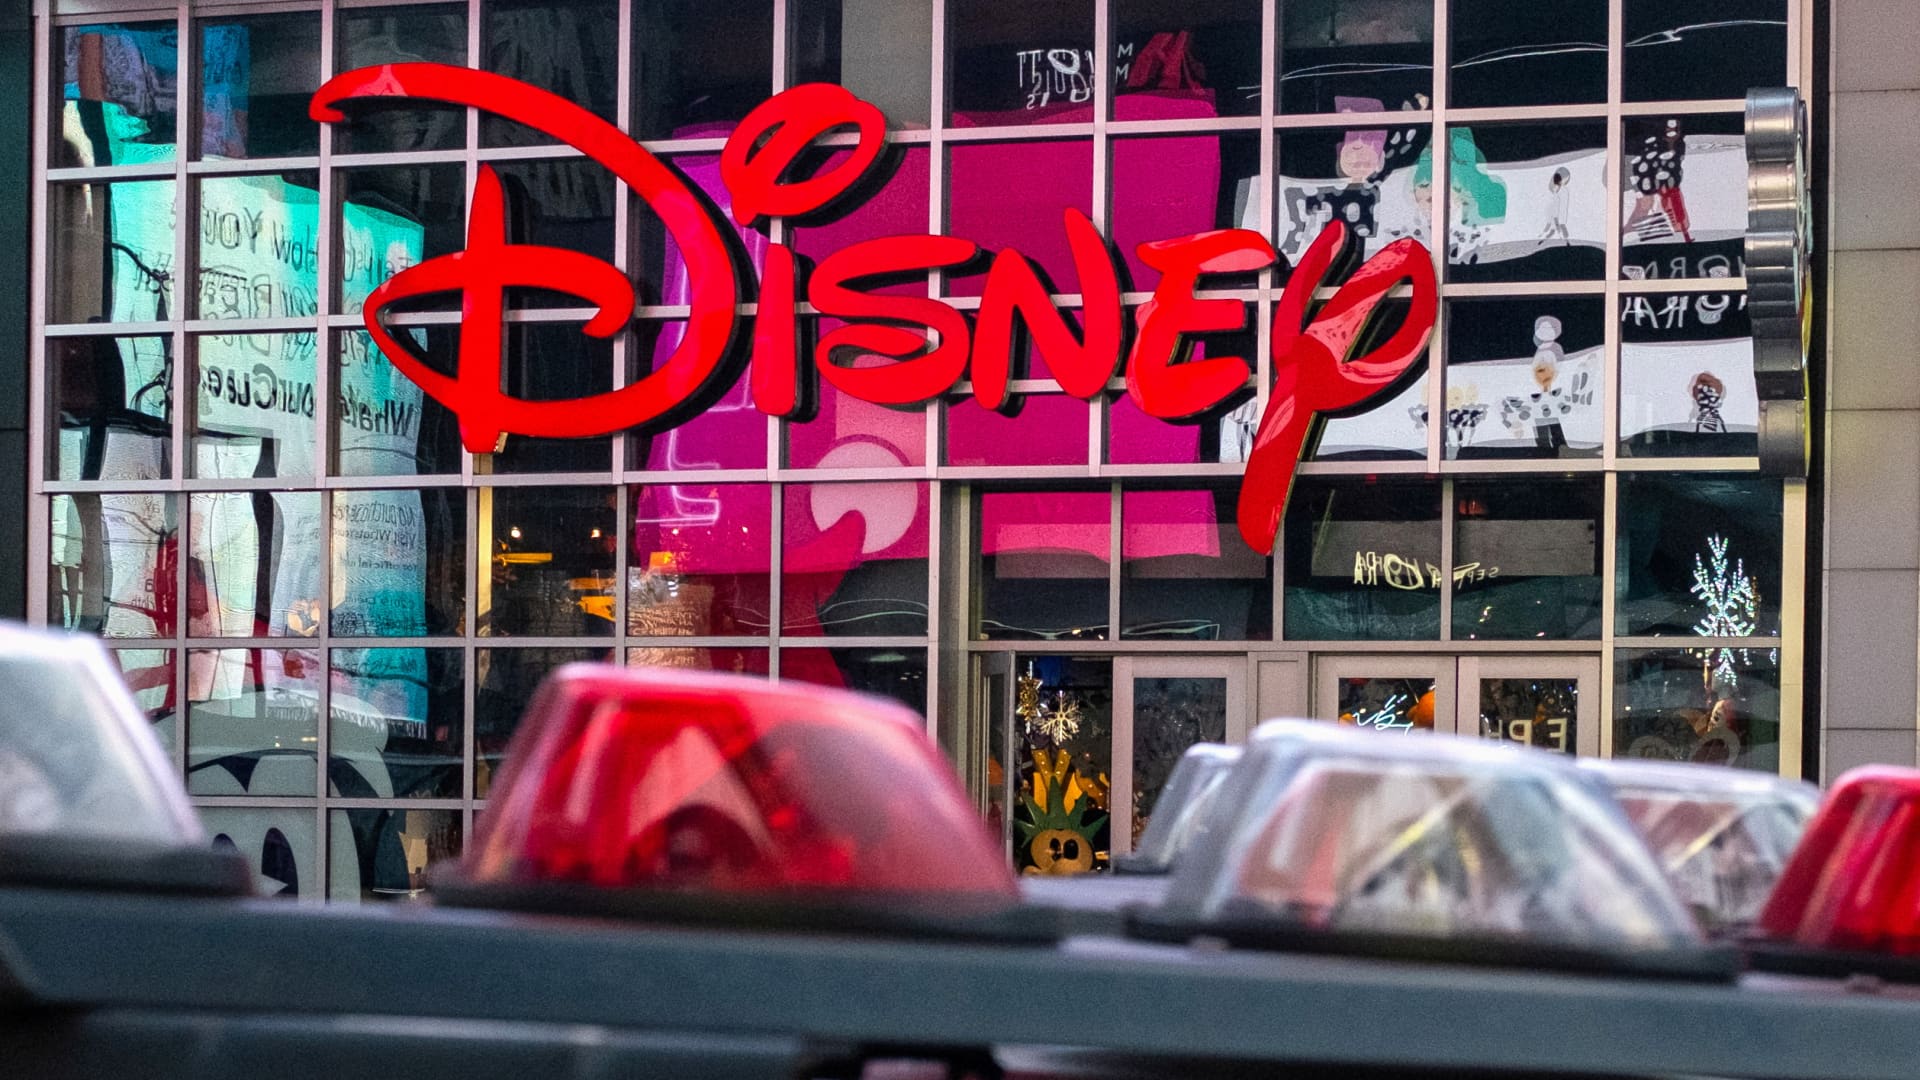 CFRA downgrades Disney on Tuesday, citing lack of dividend and buyback